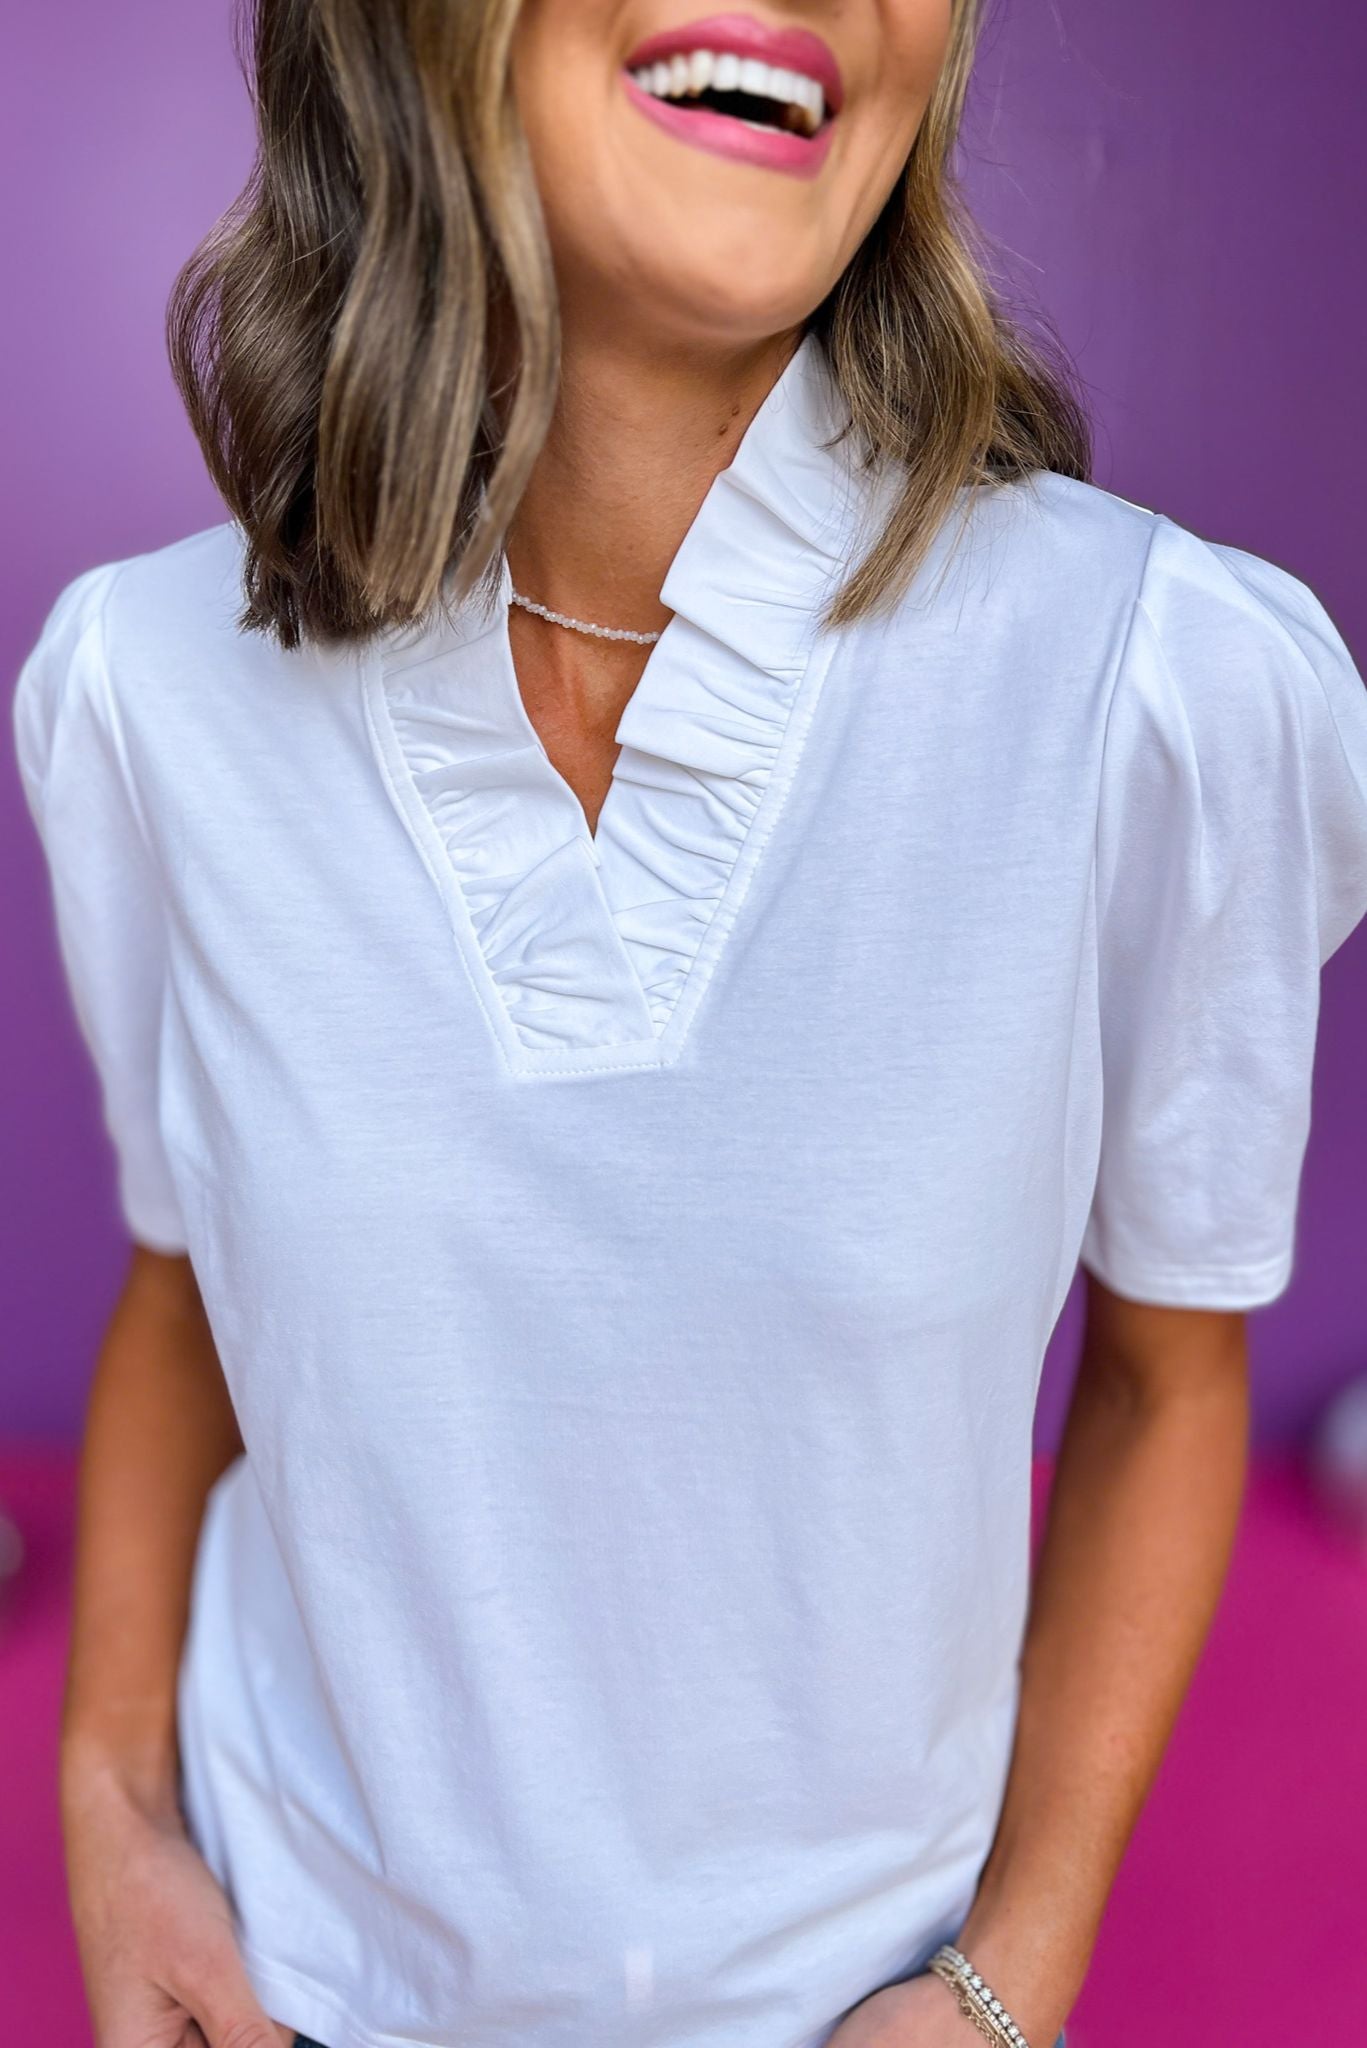 SSYS The Savannah Ruffle Collar 3/4 Sleeve Top In White, ssys the label, ssys top, savannah top, must have top, ruffle neck top, elevated top, mom style, spring style, summer style, shop style your senses by Mallory Fitzsimmons, ssys by Mallory Fitzsimmons  Edit alt text